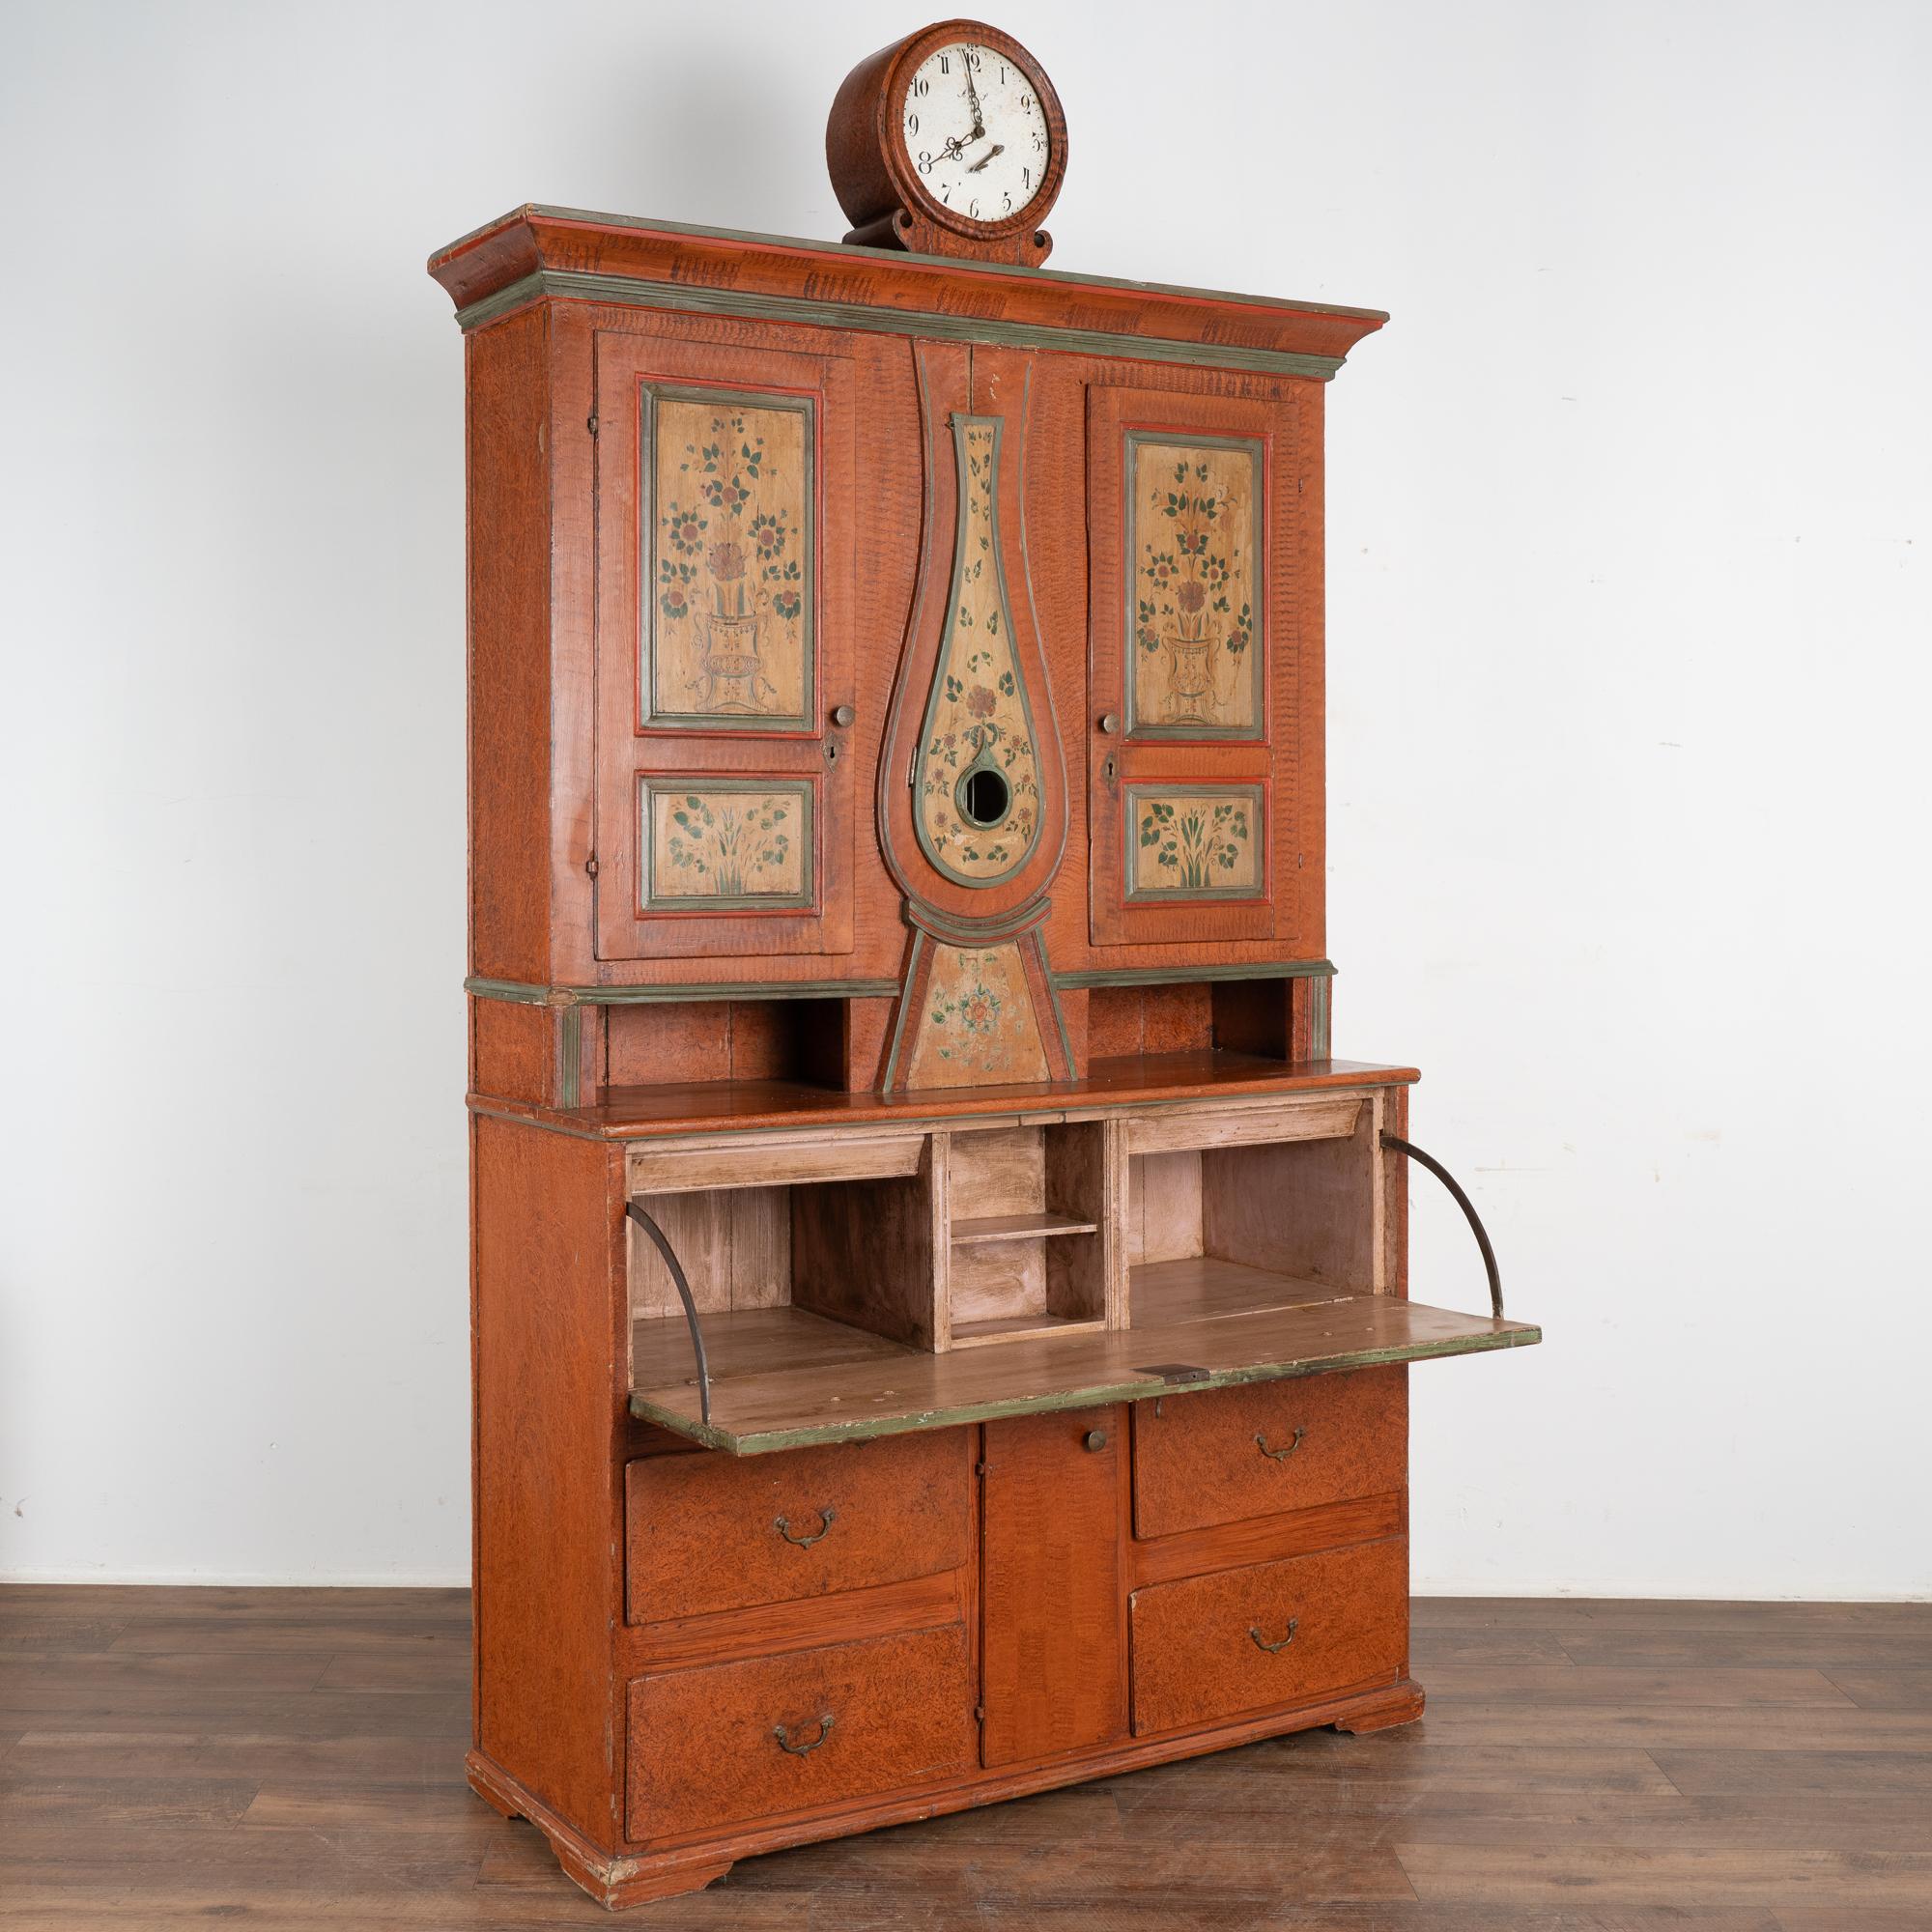 Remarkable original painted Swedish cabinet with clock and secretary with drop front desk. 
The traditional faux painted burnt umber background is balanced by the delicate hand-painted floral panels of the upper panel doors and clock body. The